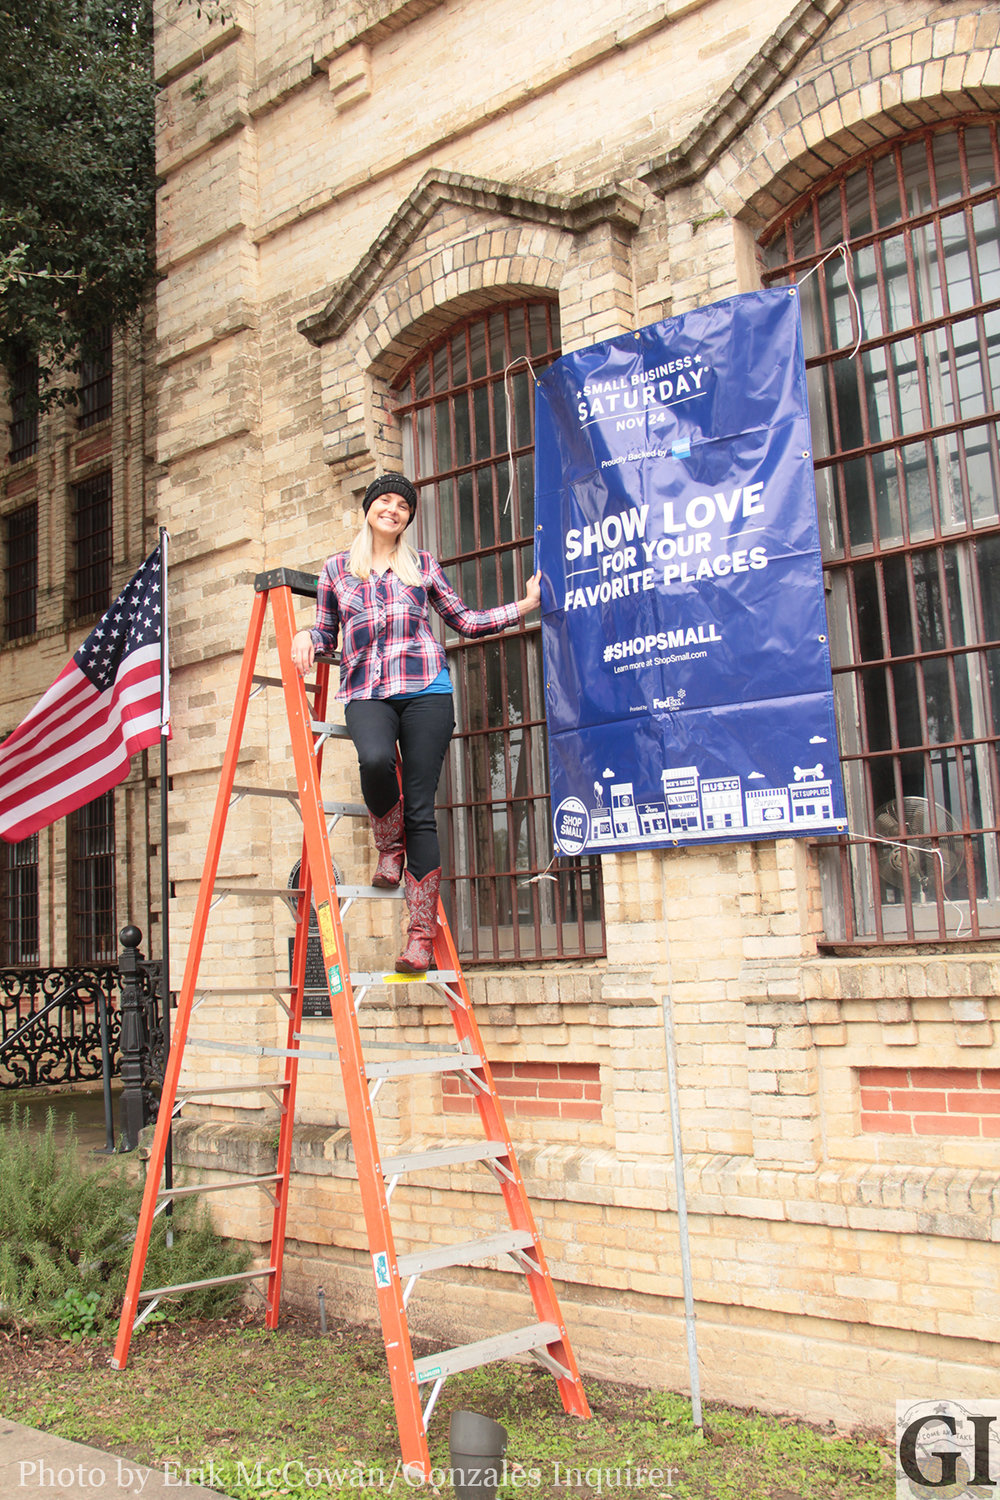 Gonzales Chamber of Commerce Executive Director Daisy Scheske Freeman wants to let the town know that Small Business Saturday is coming up next week. Here, she hangs a banner off of her offices at the Old Jail.